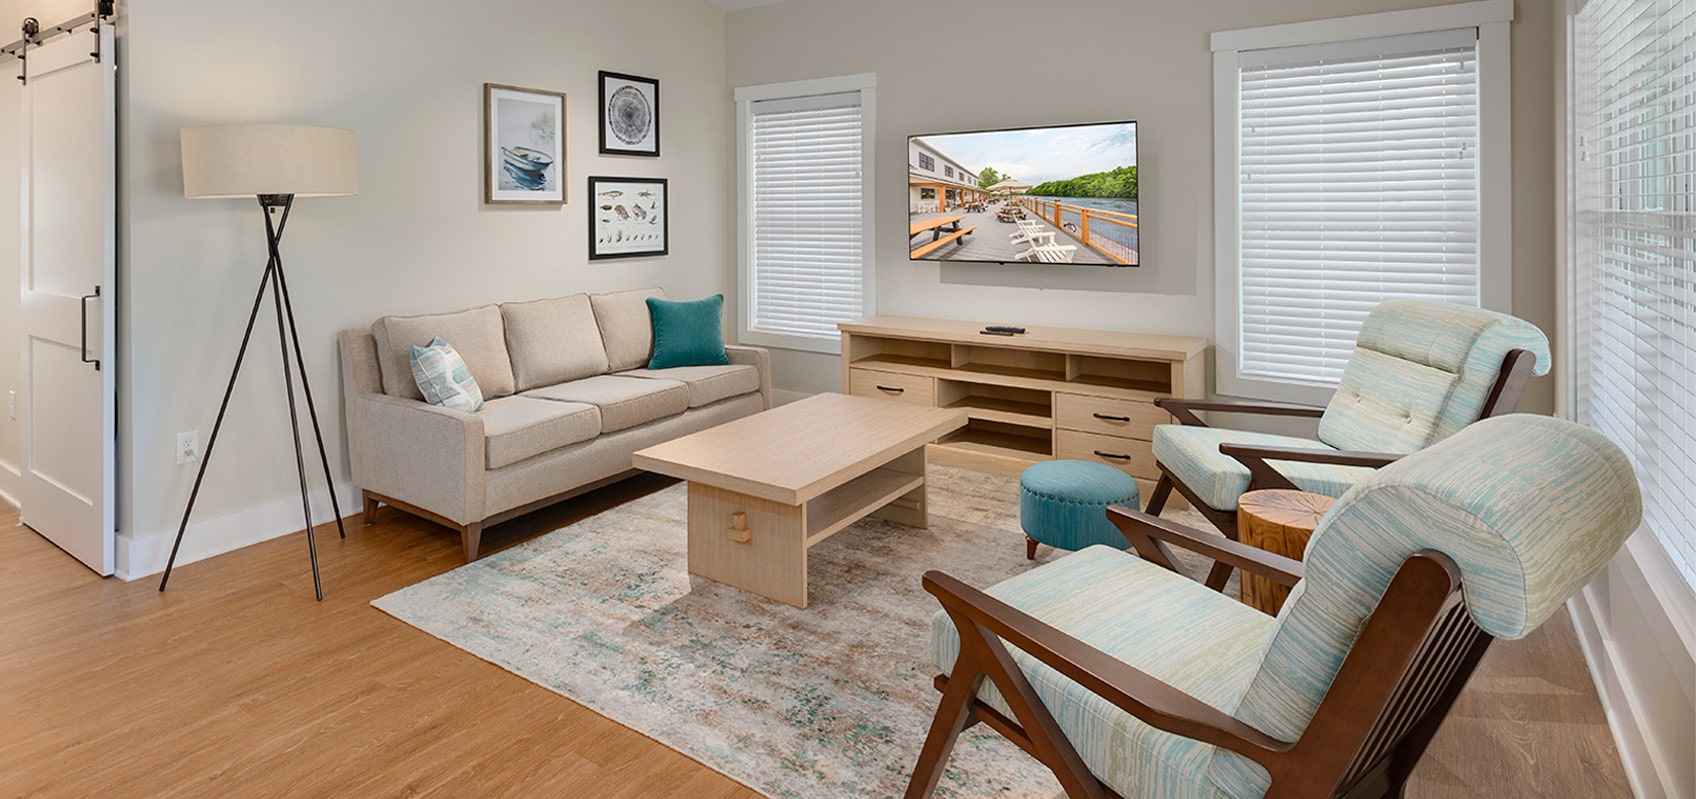 living room with lounge seating at the cove at sylvan beach